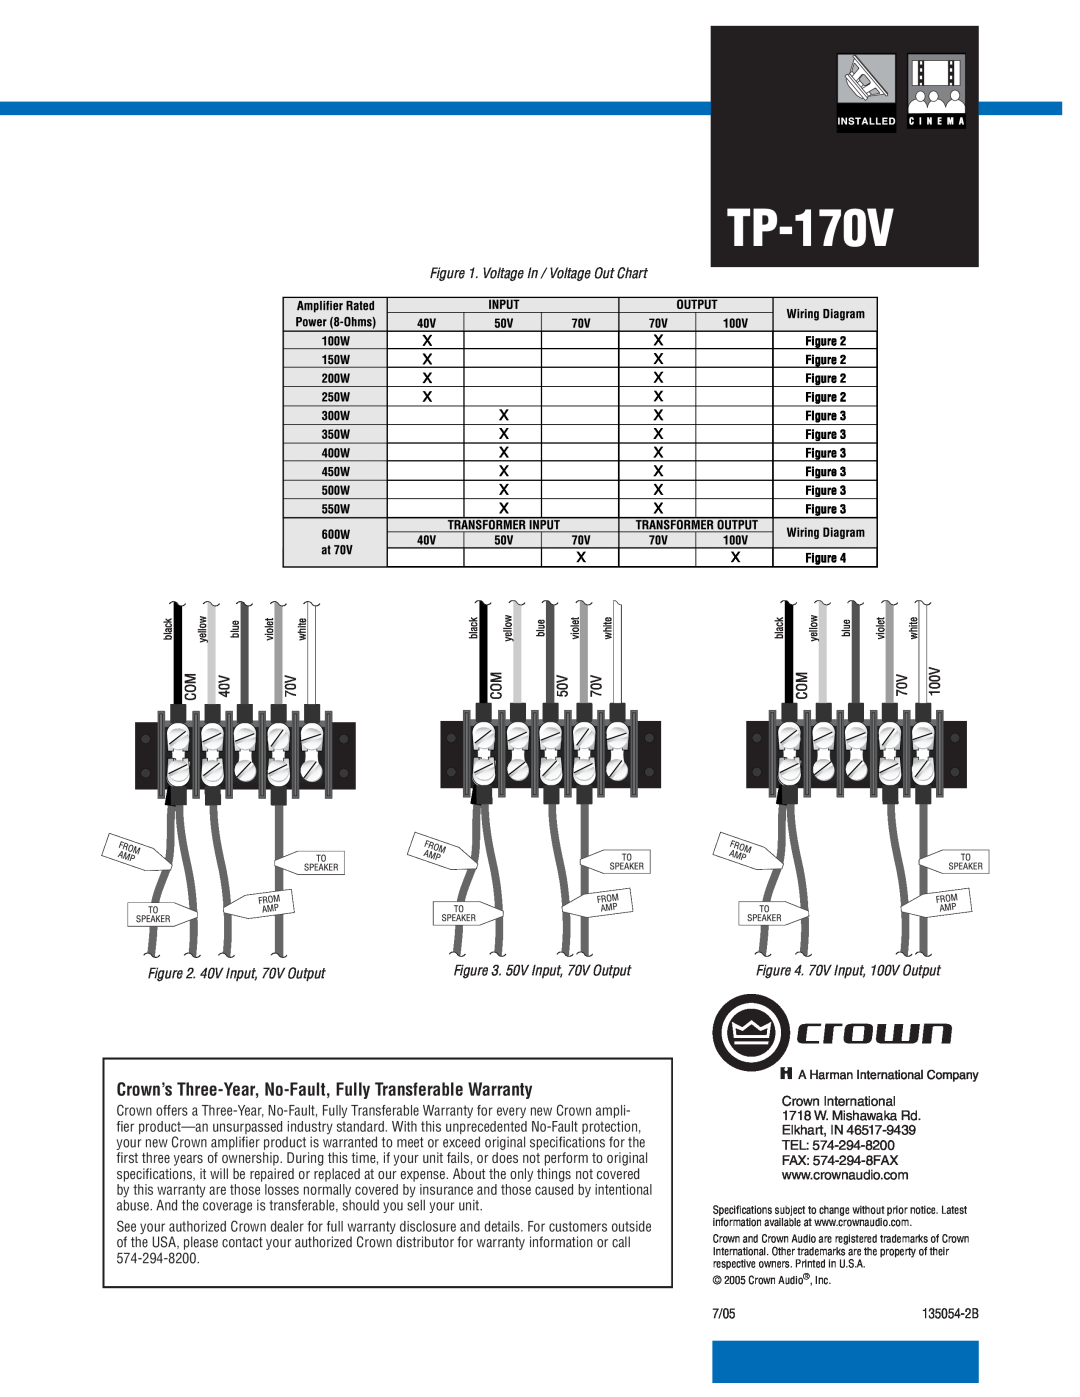 Crown Audio TP-170V Crown’s Three-Year, No-Fault, Fully Transferable Warranty, Voltage In / Voltage Out Chart 